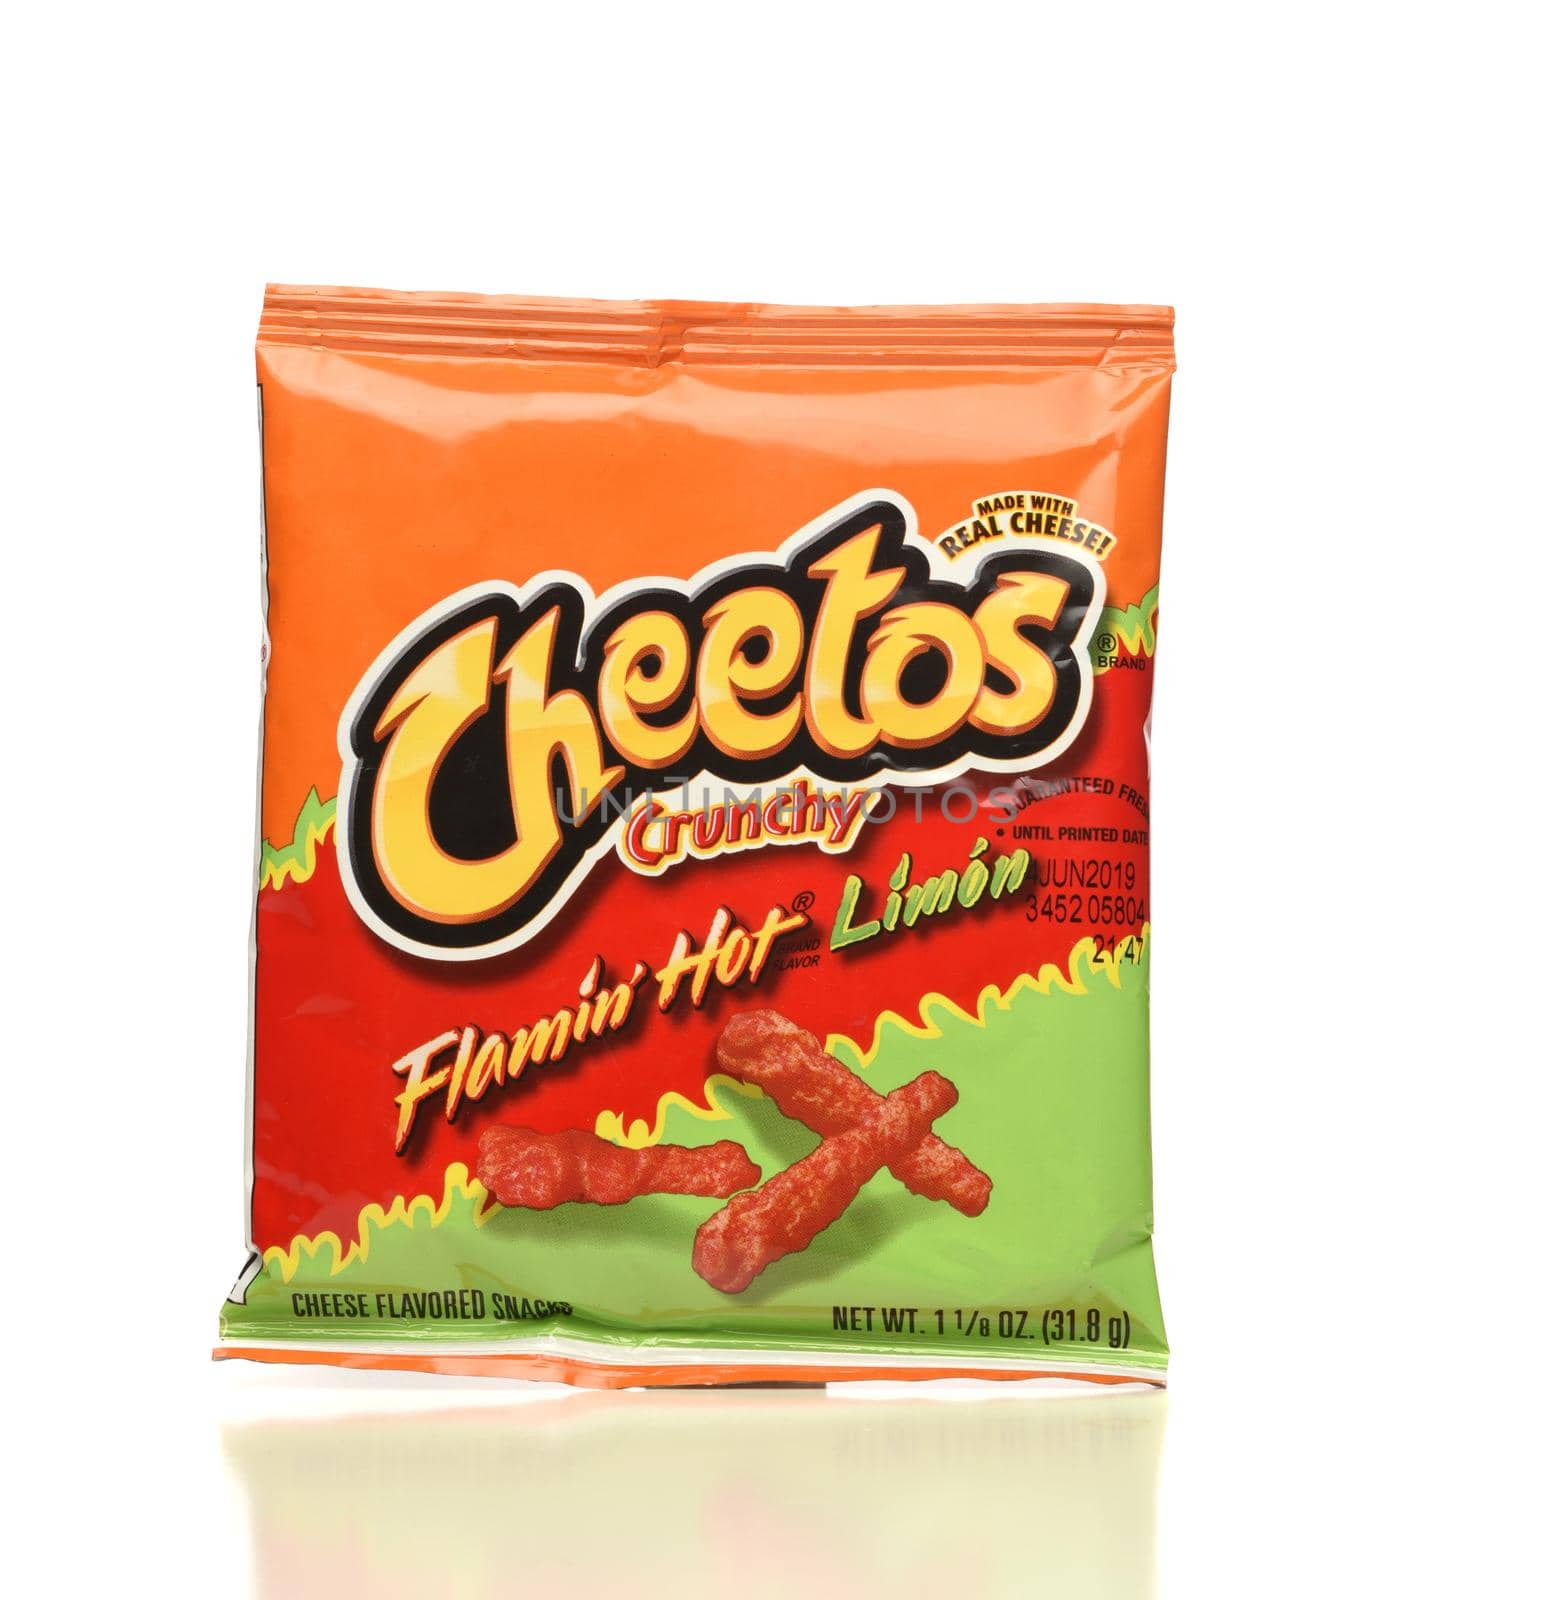 A package of Cheetos cheese flavored puff corn snack, from Frito-Lay by sCukrov